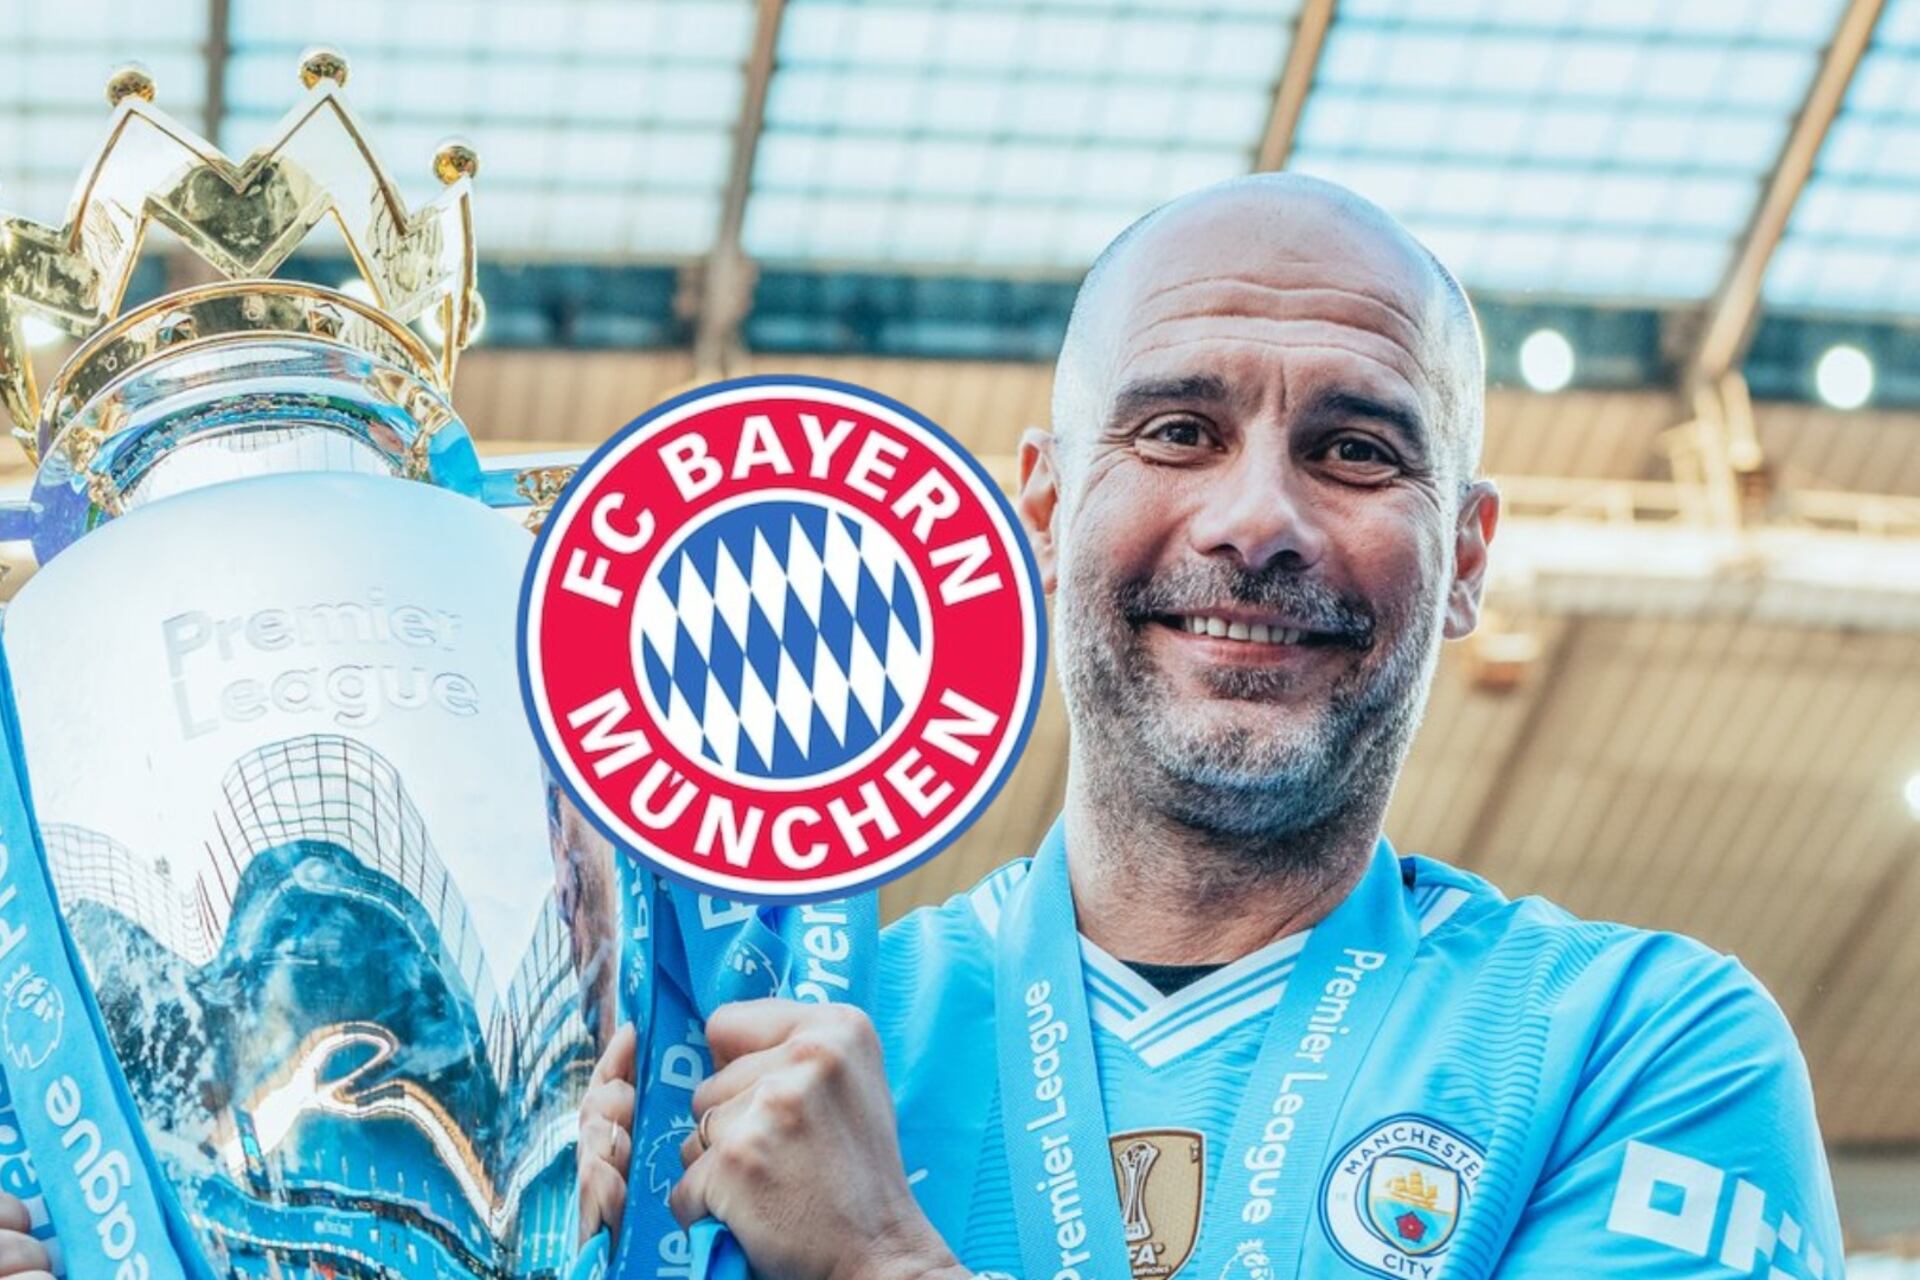 They wanted to bring back Guardiola, but as they couldn’t, Bayern’s new coach could be Pep’s apprentice